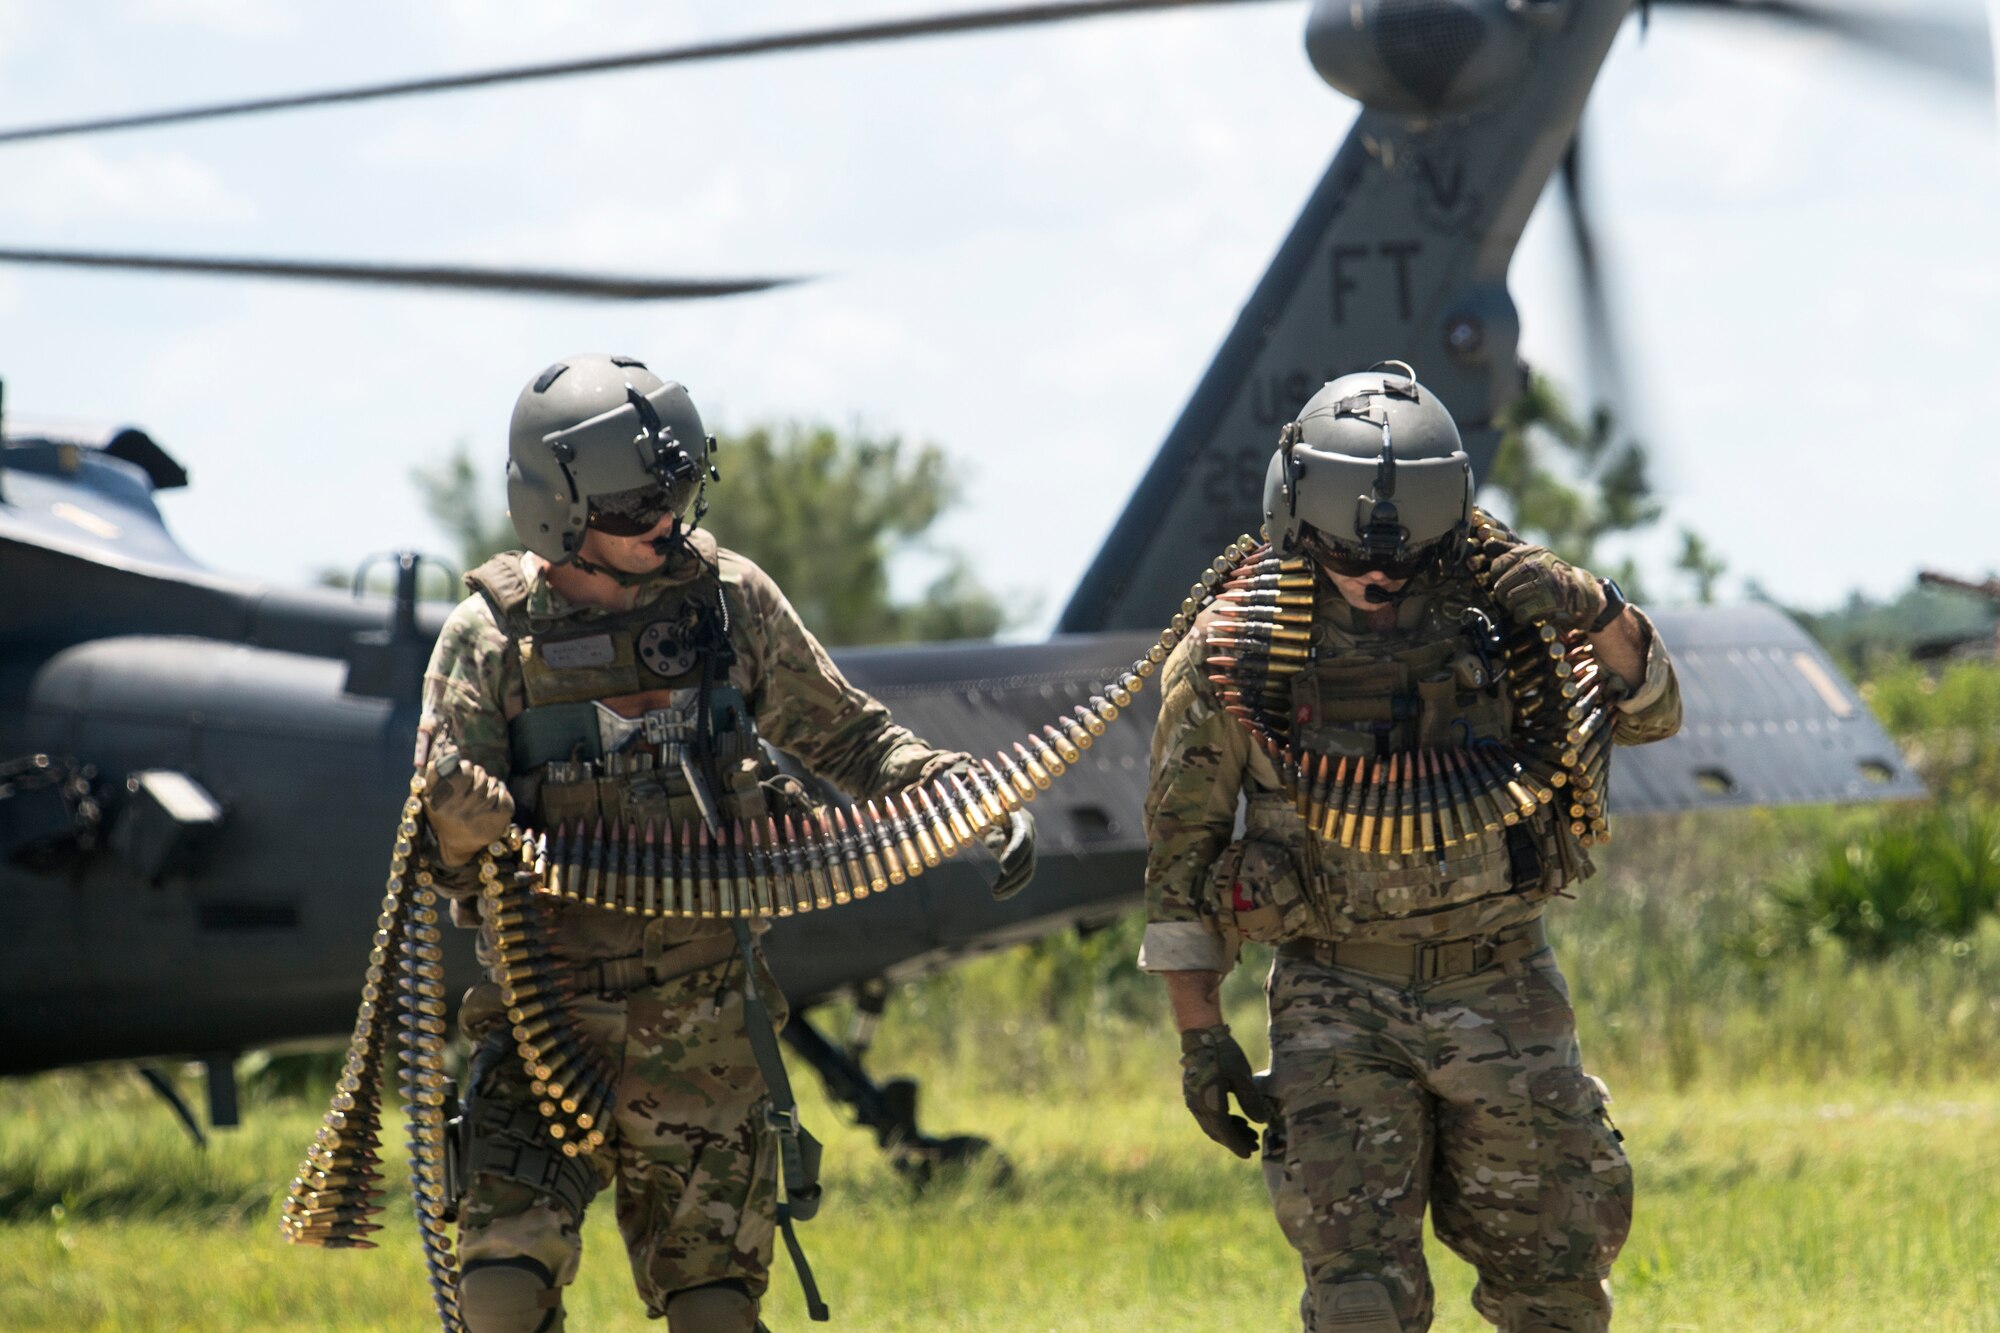 Special missions aviators from the 41st Rescue Squadron (RQS) carry ammunition to an HH-60G Pave Hawk, Aug. 17, 2018, at Patrick Air Force Base, Fla. Airmen from the 41st RQS and 41st Helicopter Maintenance Unit traveled to Patrick AFB to participate in a spin-up exercise. During the exercise, Airmen faced scenarios and situations they may encounter downrange. (U.S. Air Force photo by Senior Airman Janiqua P. Robinson)